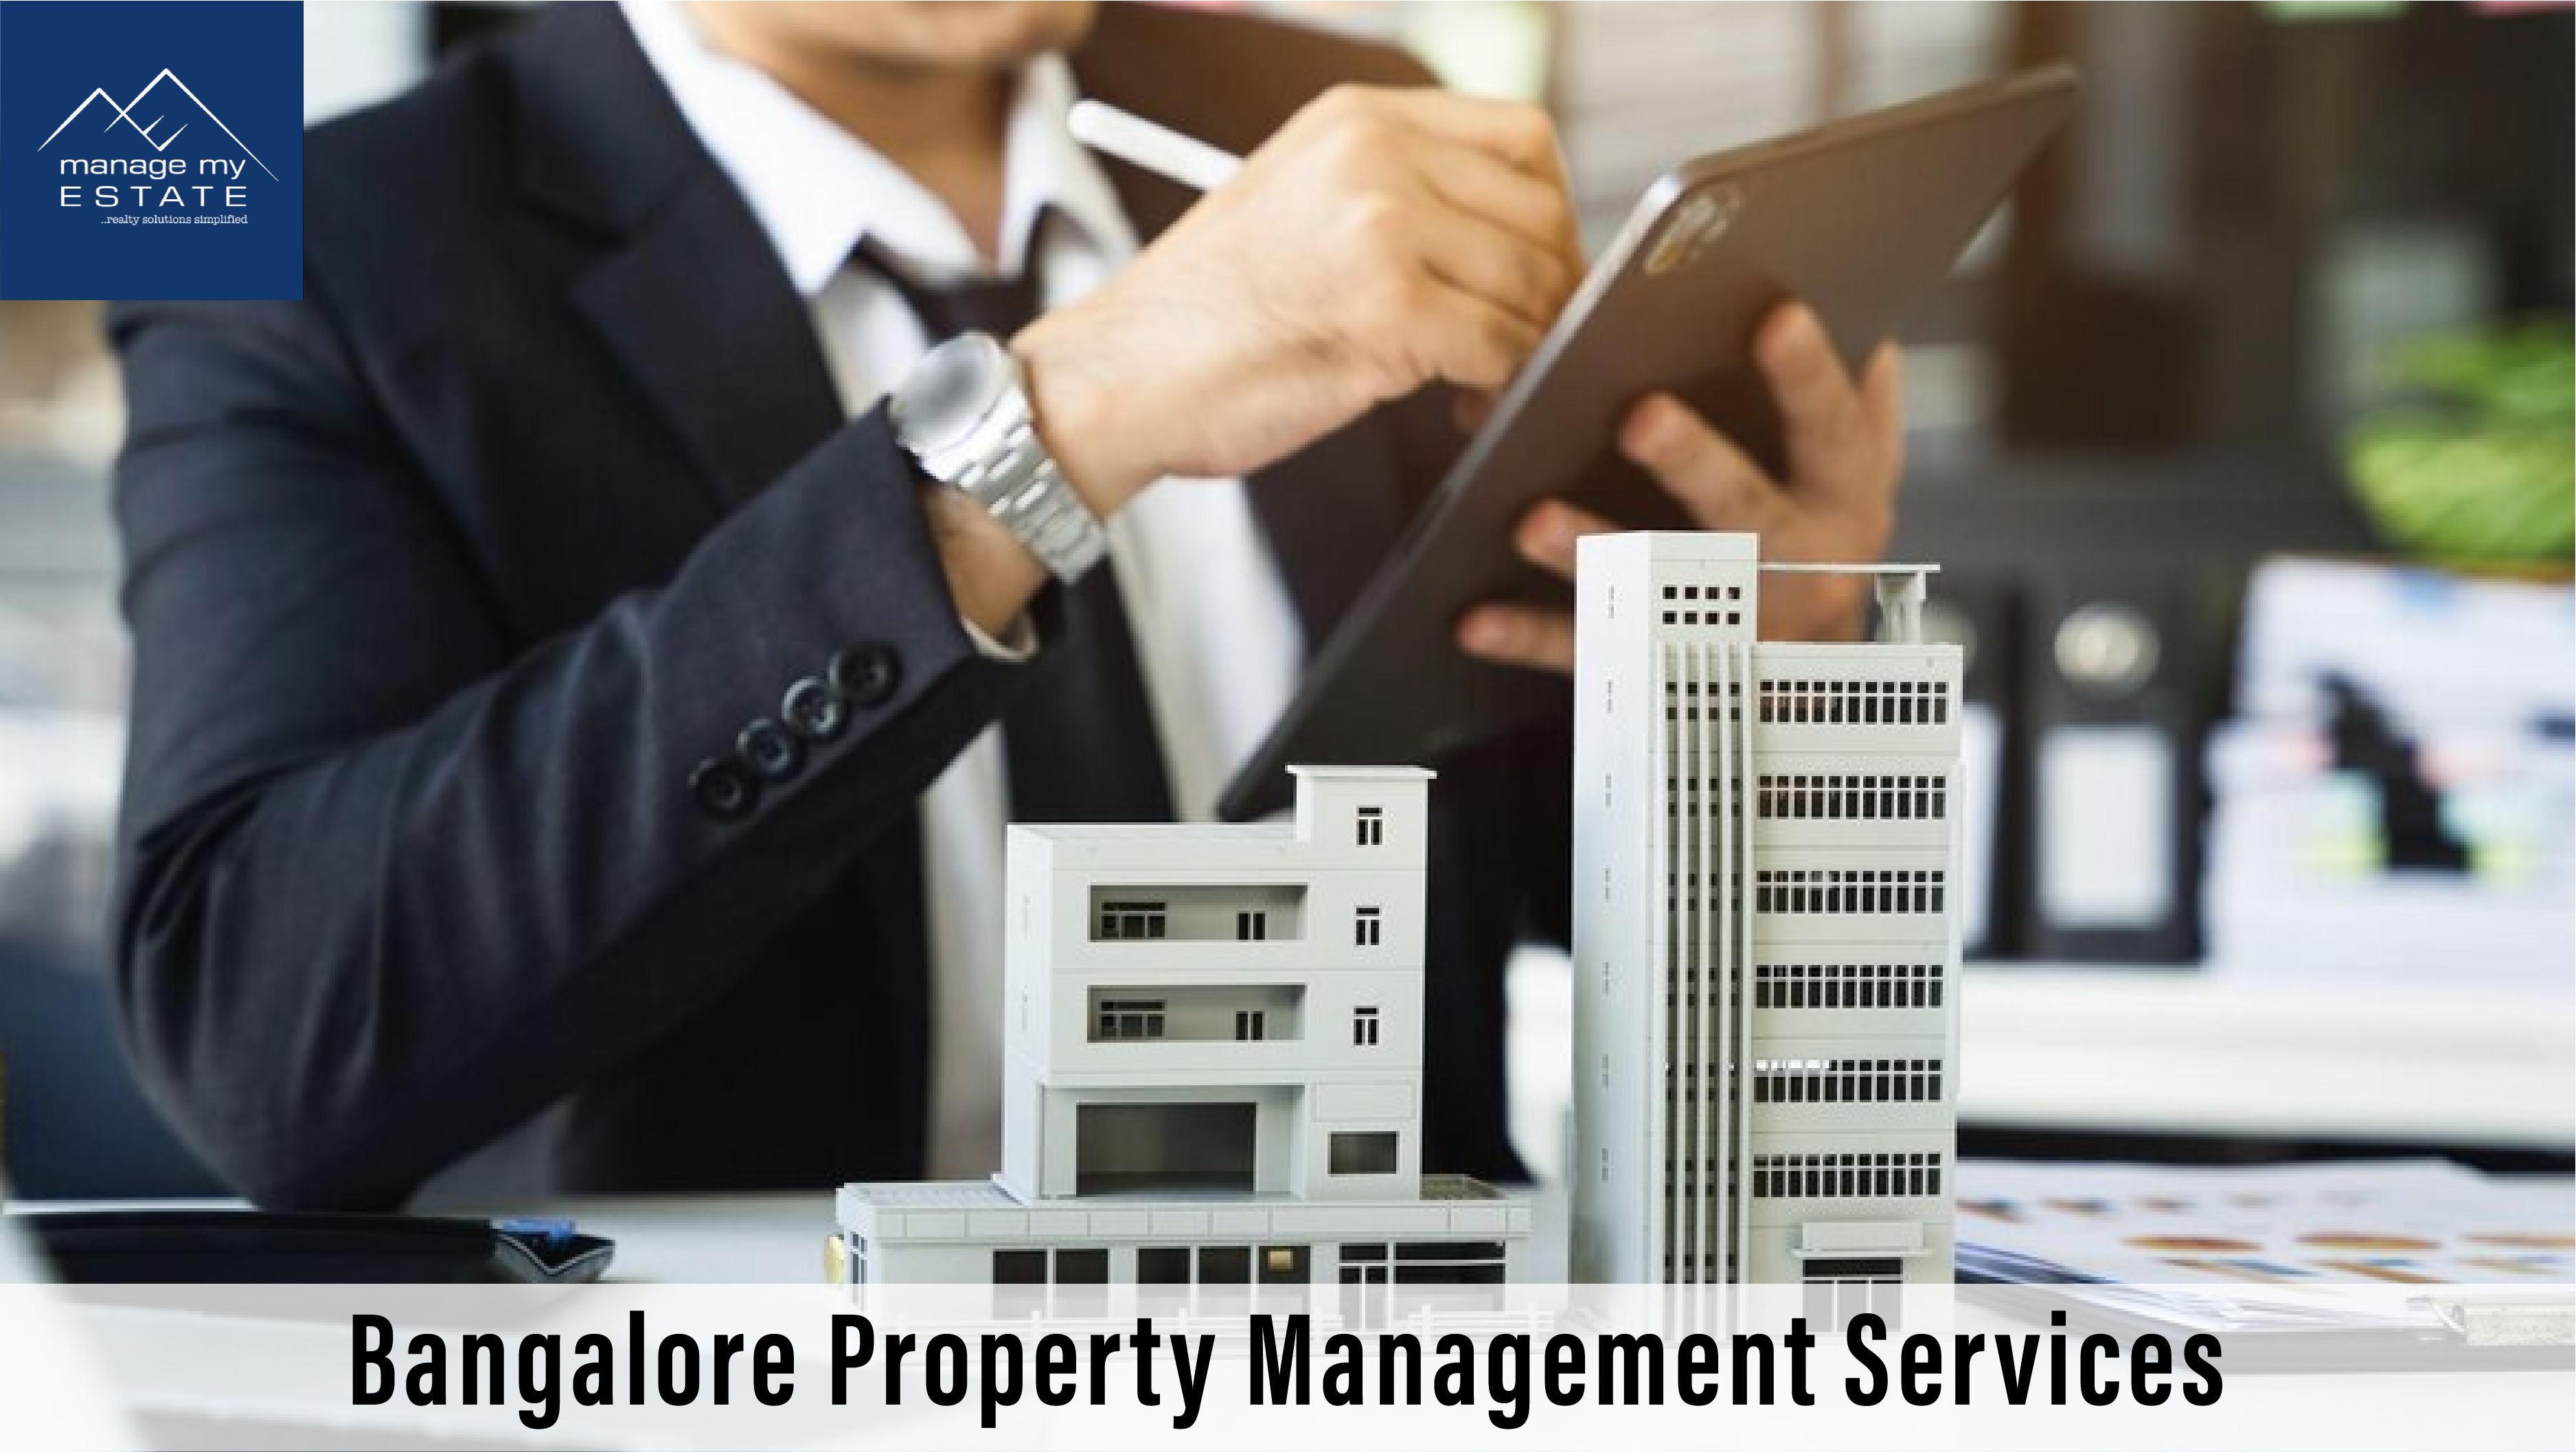 Bangalore Property Management Services by Manage My Estate